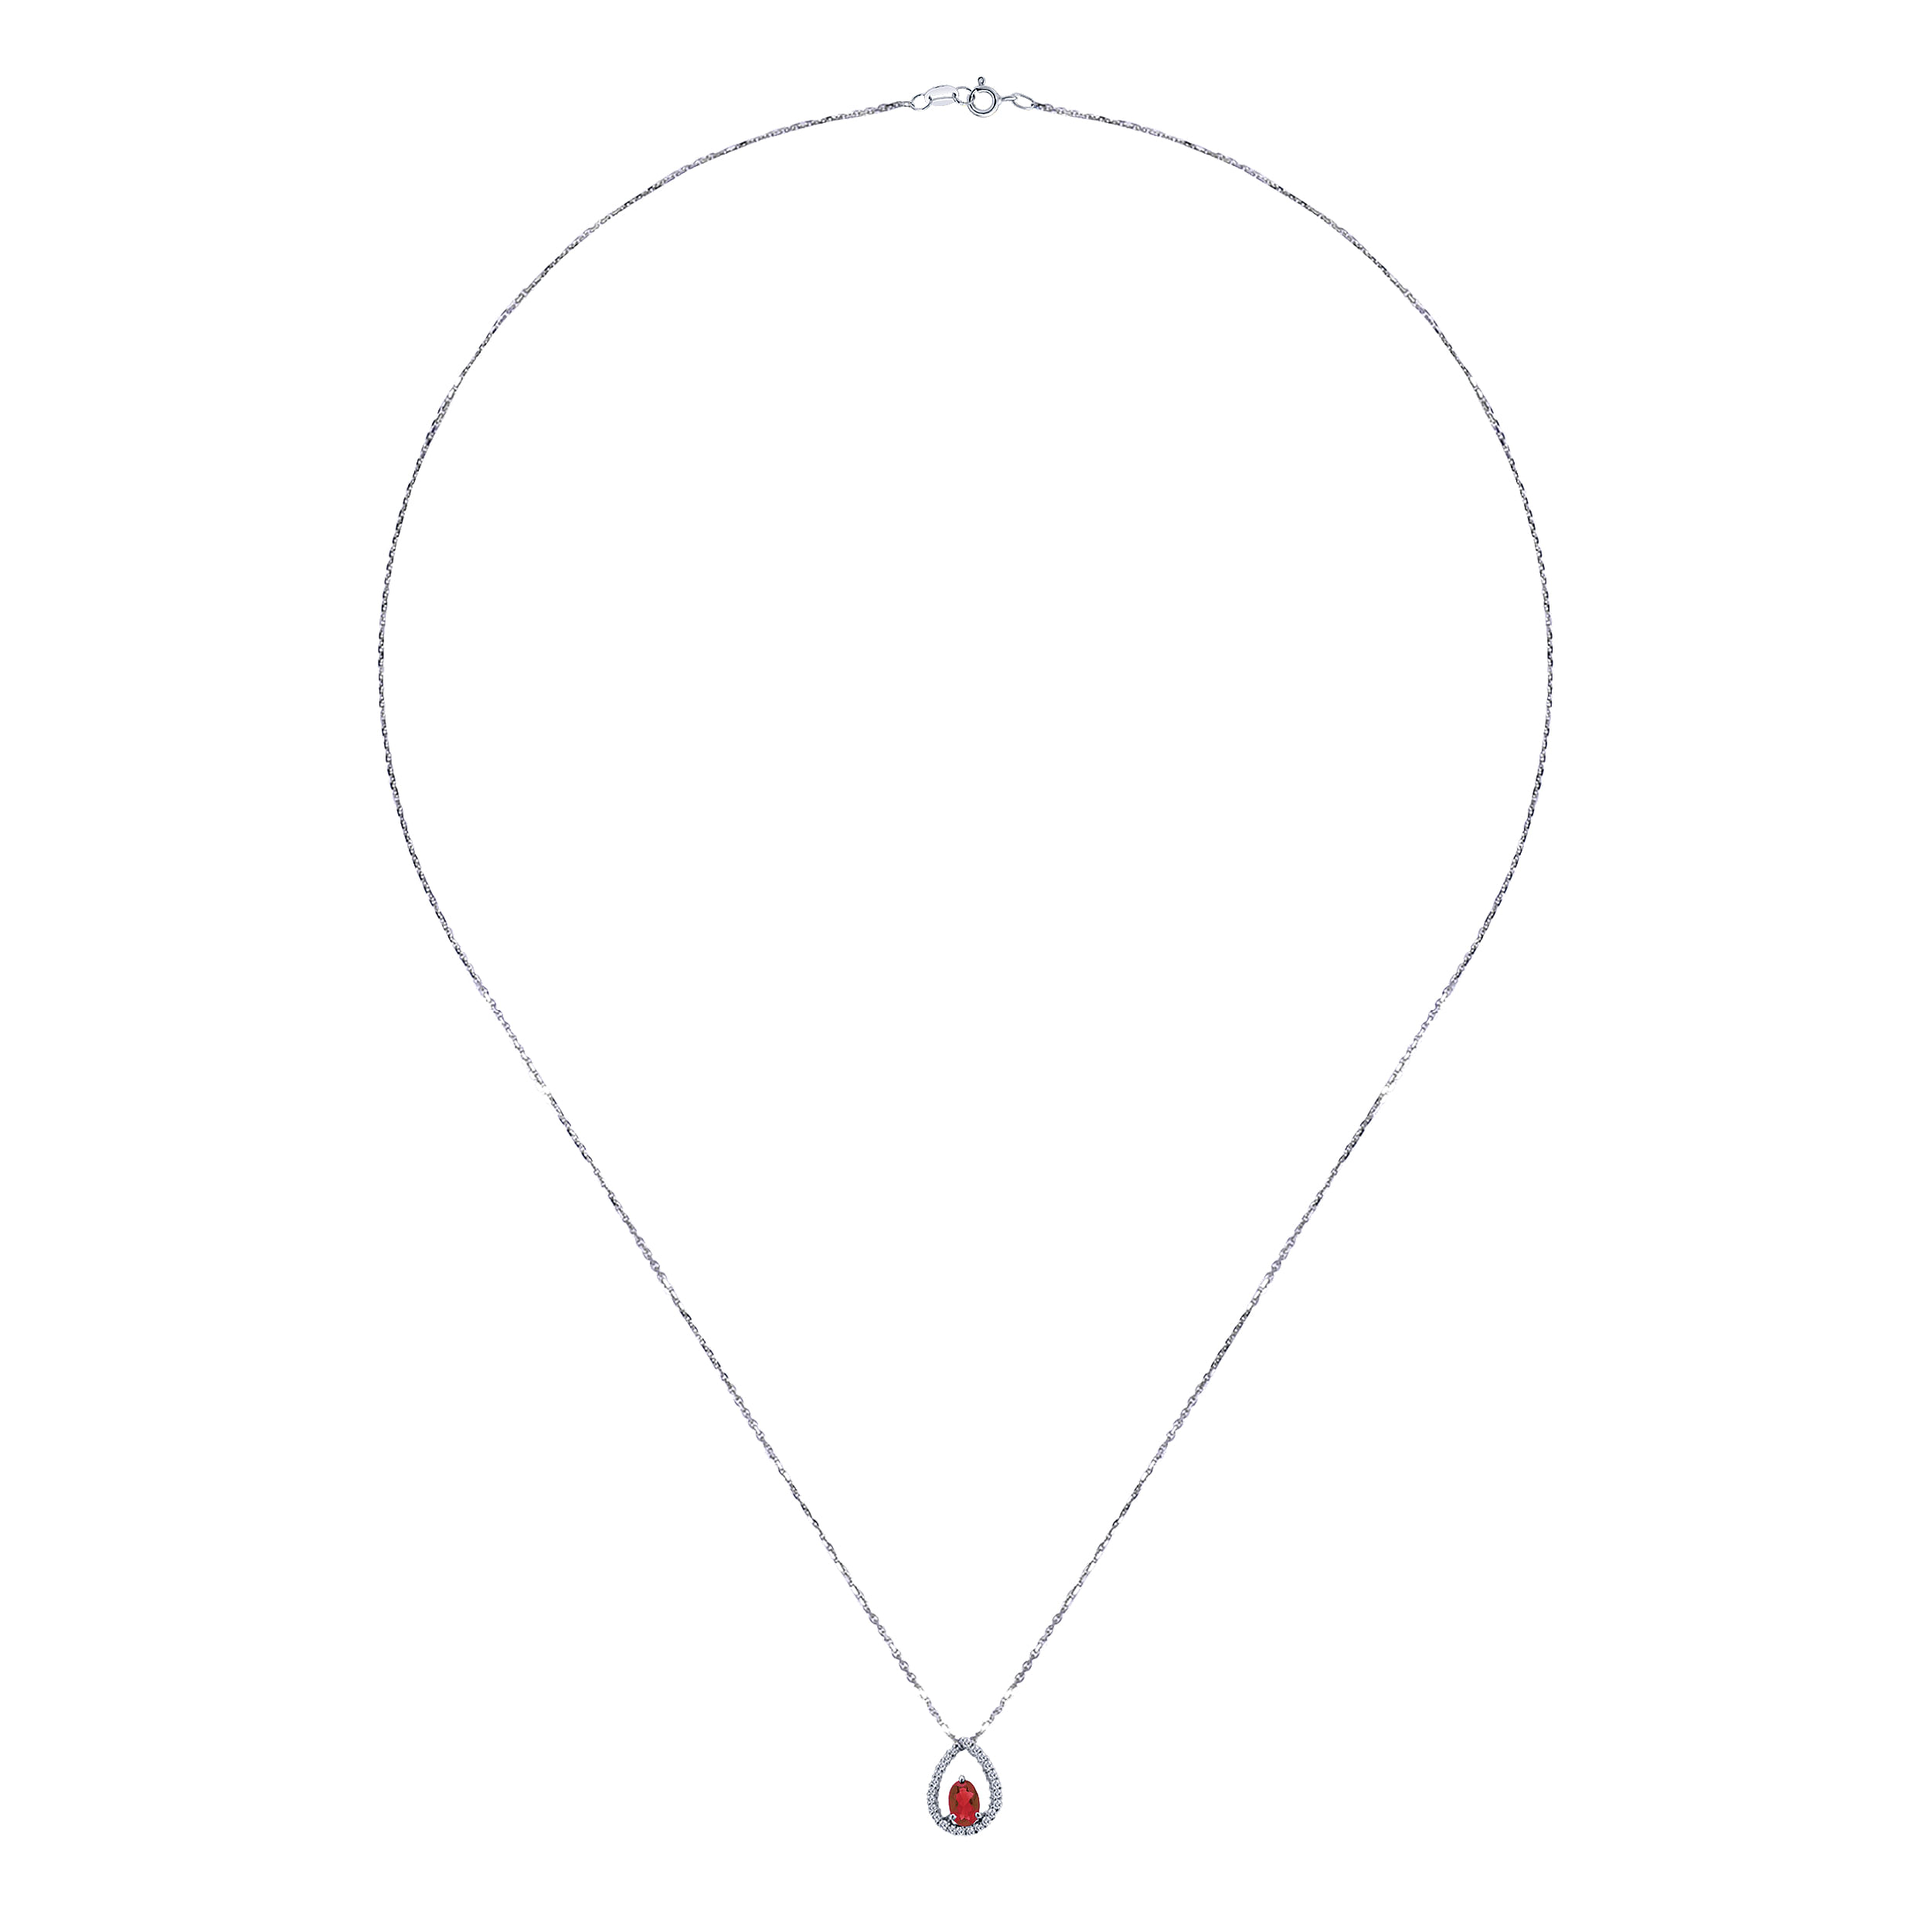 14K White Gold Ruby and Diamond Pendant Necklace